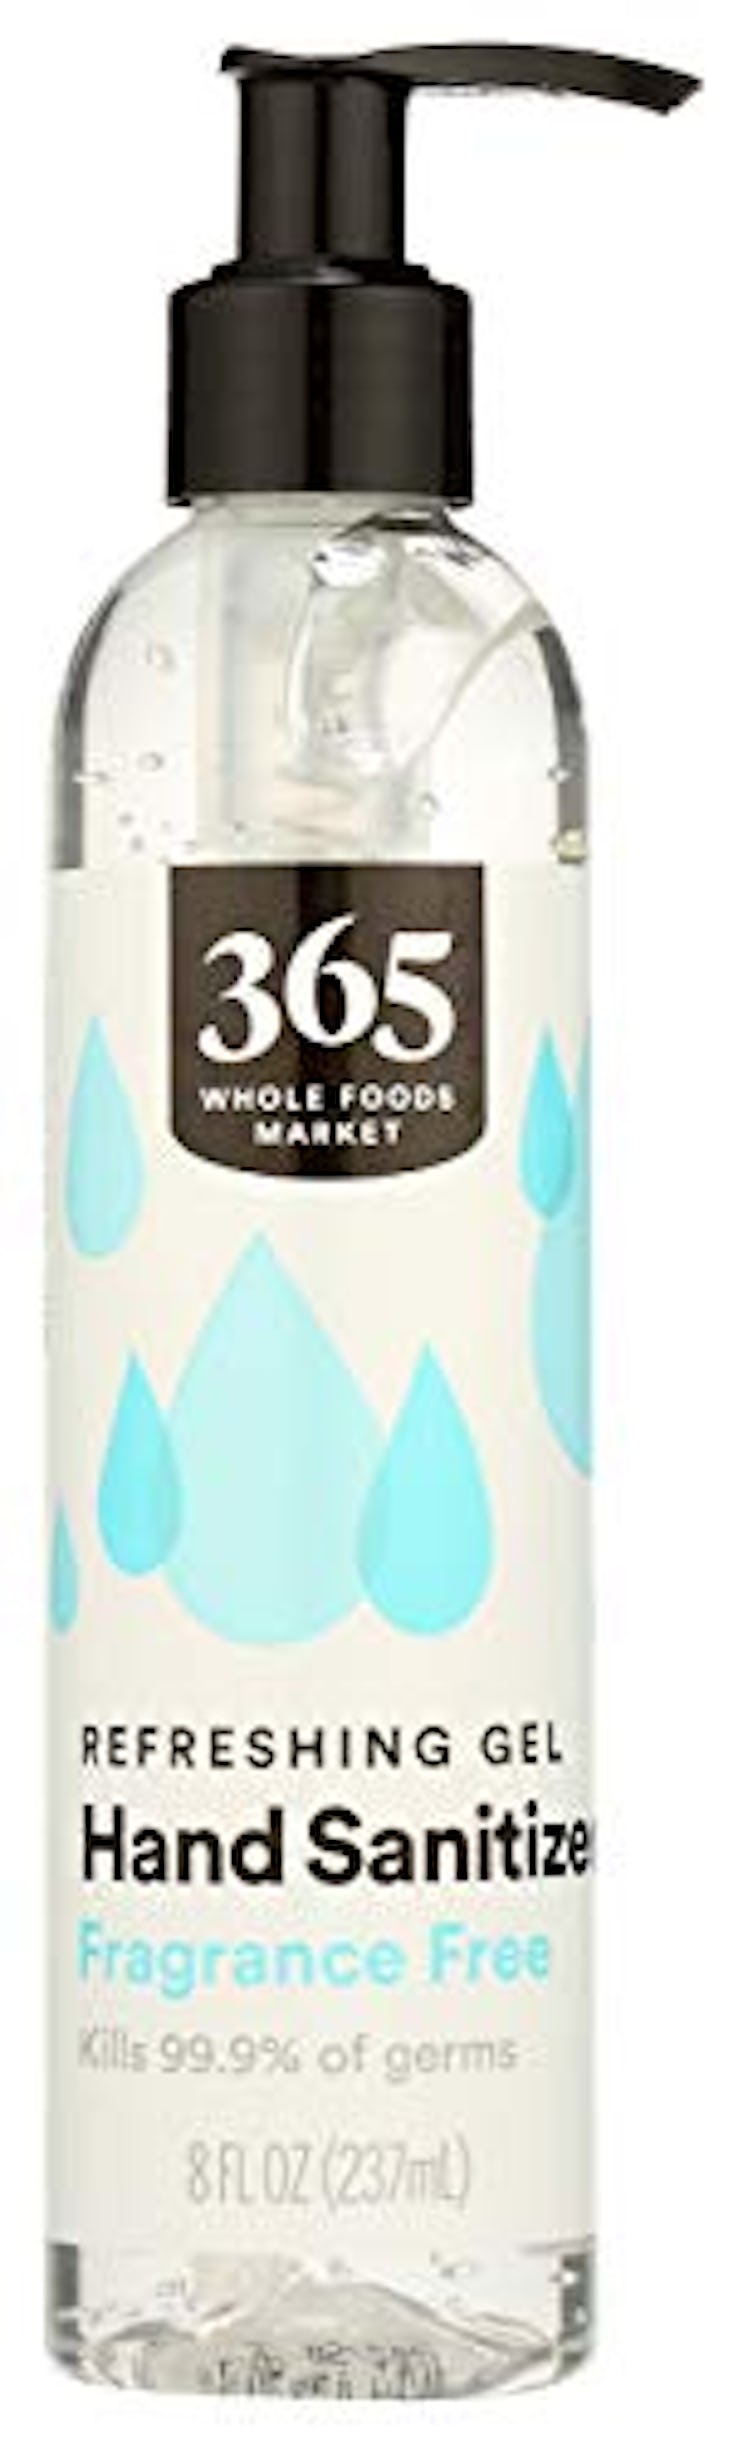 Hand Sanitizer Gel by 365 by Whole Foods Market